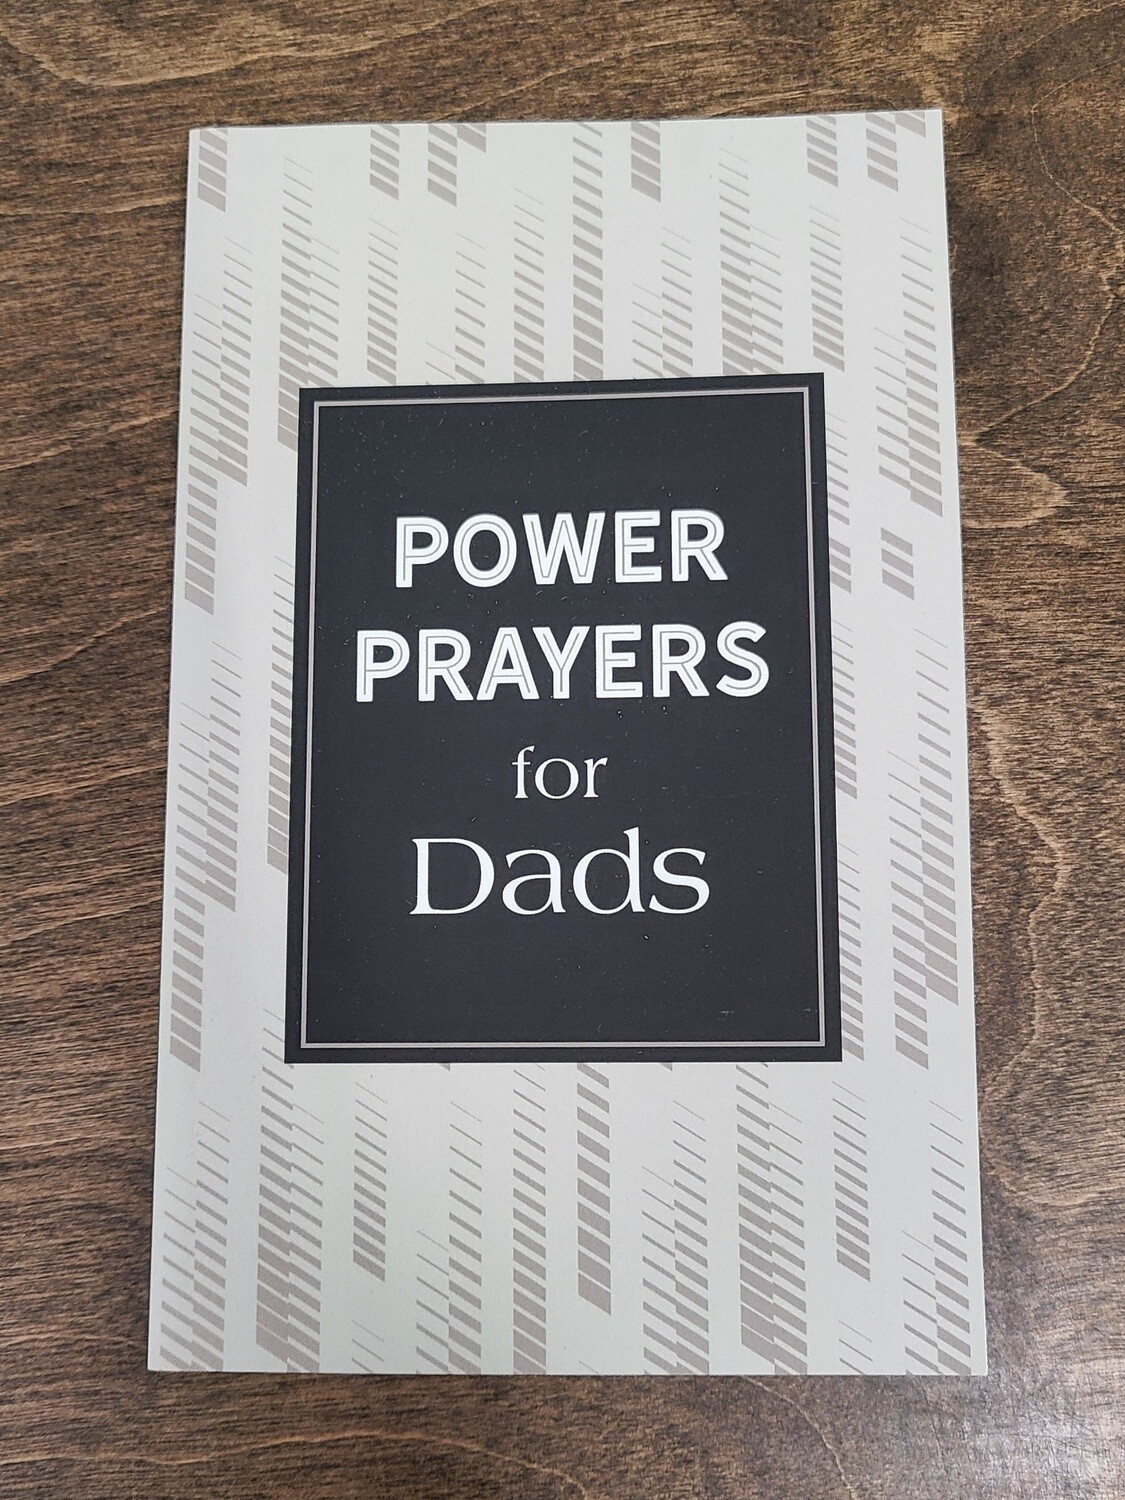 Power Prayers for Dads by Glenn Hascall